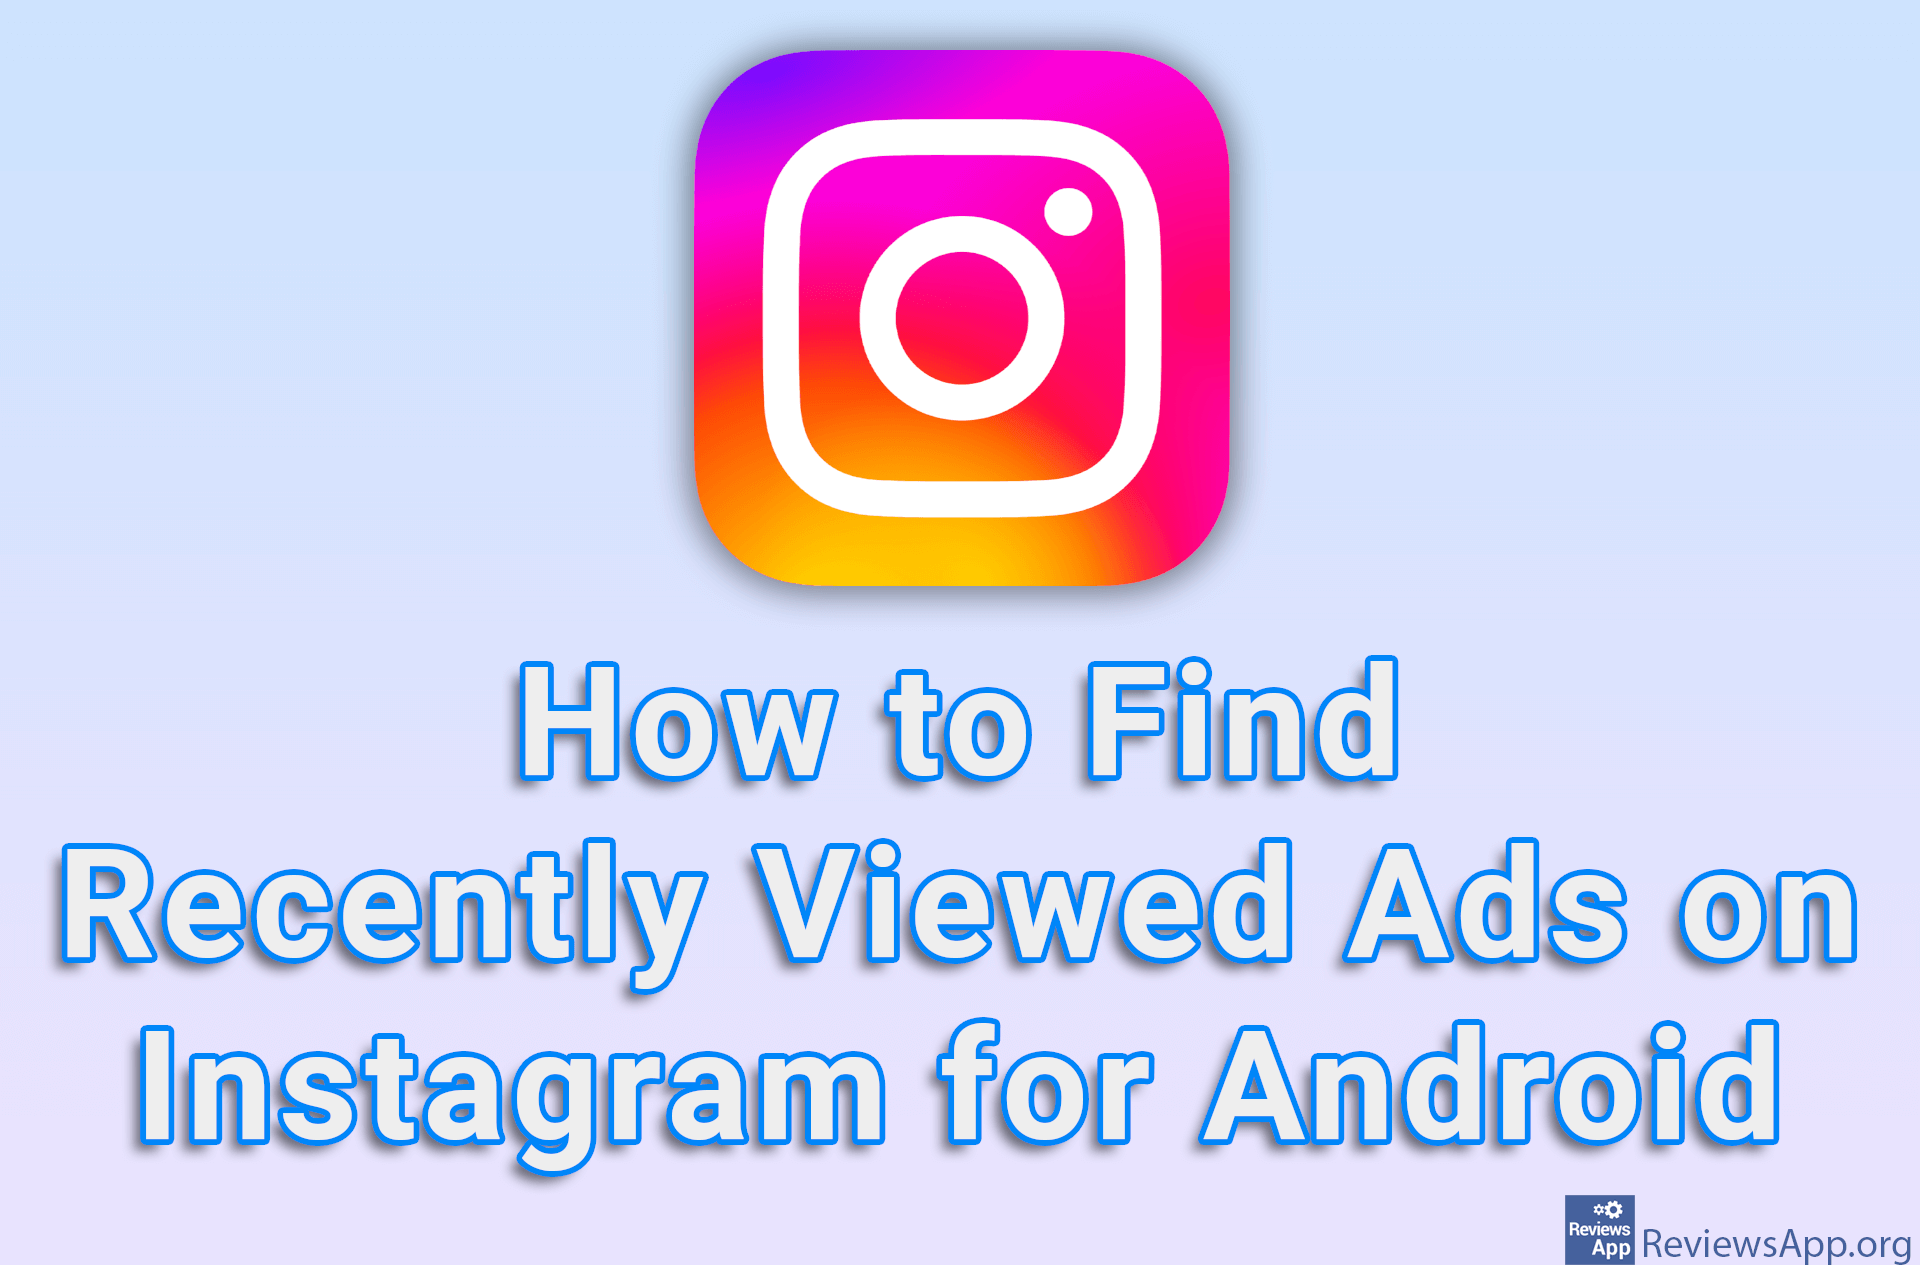 How to Find Recently Viewed Ads on Instagram for Android